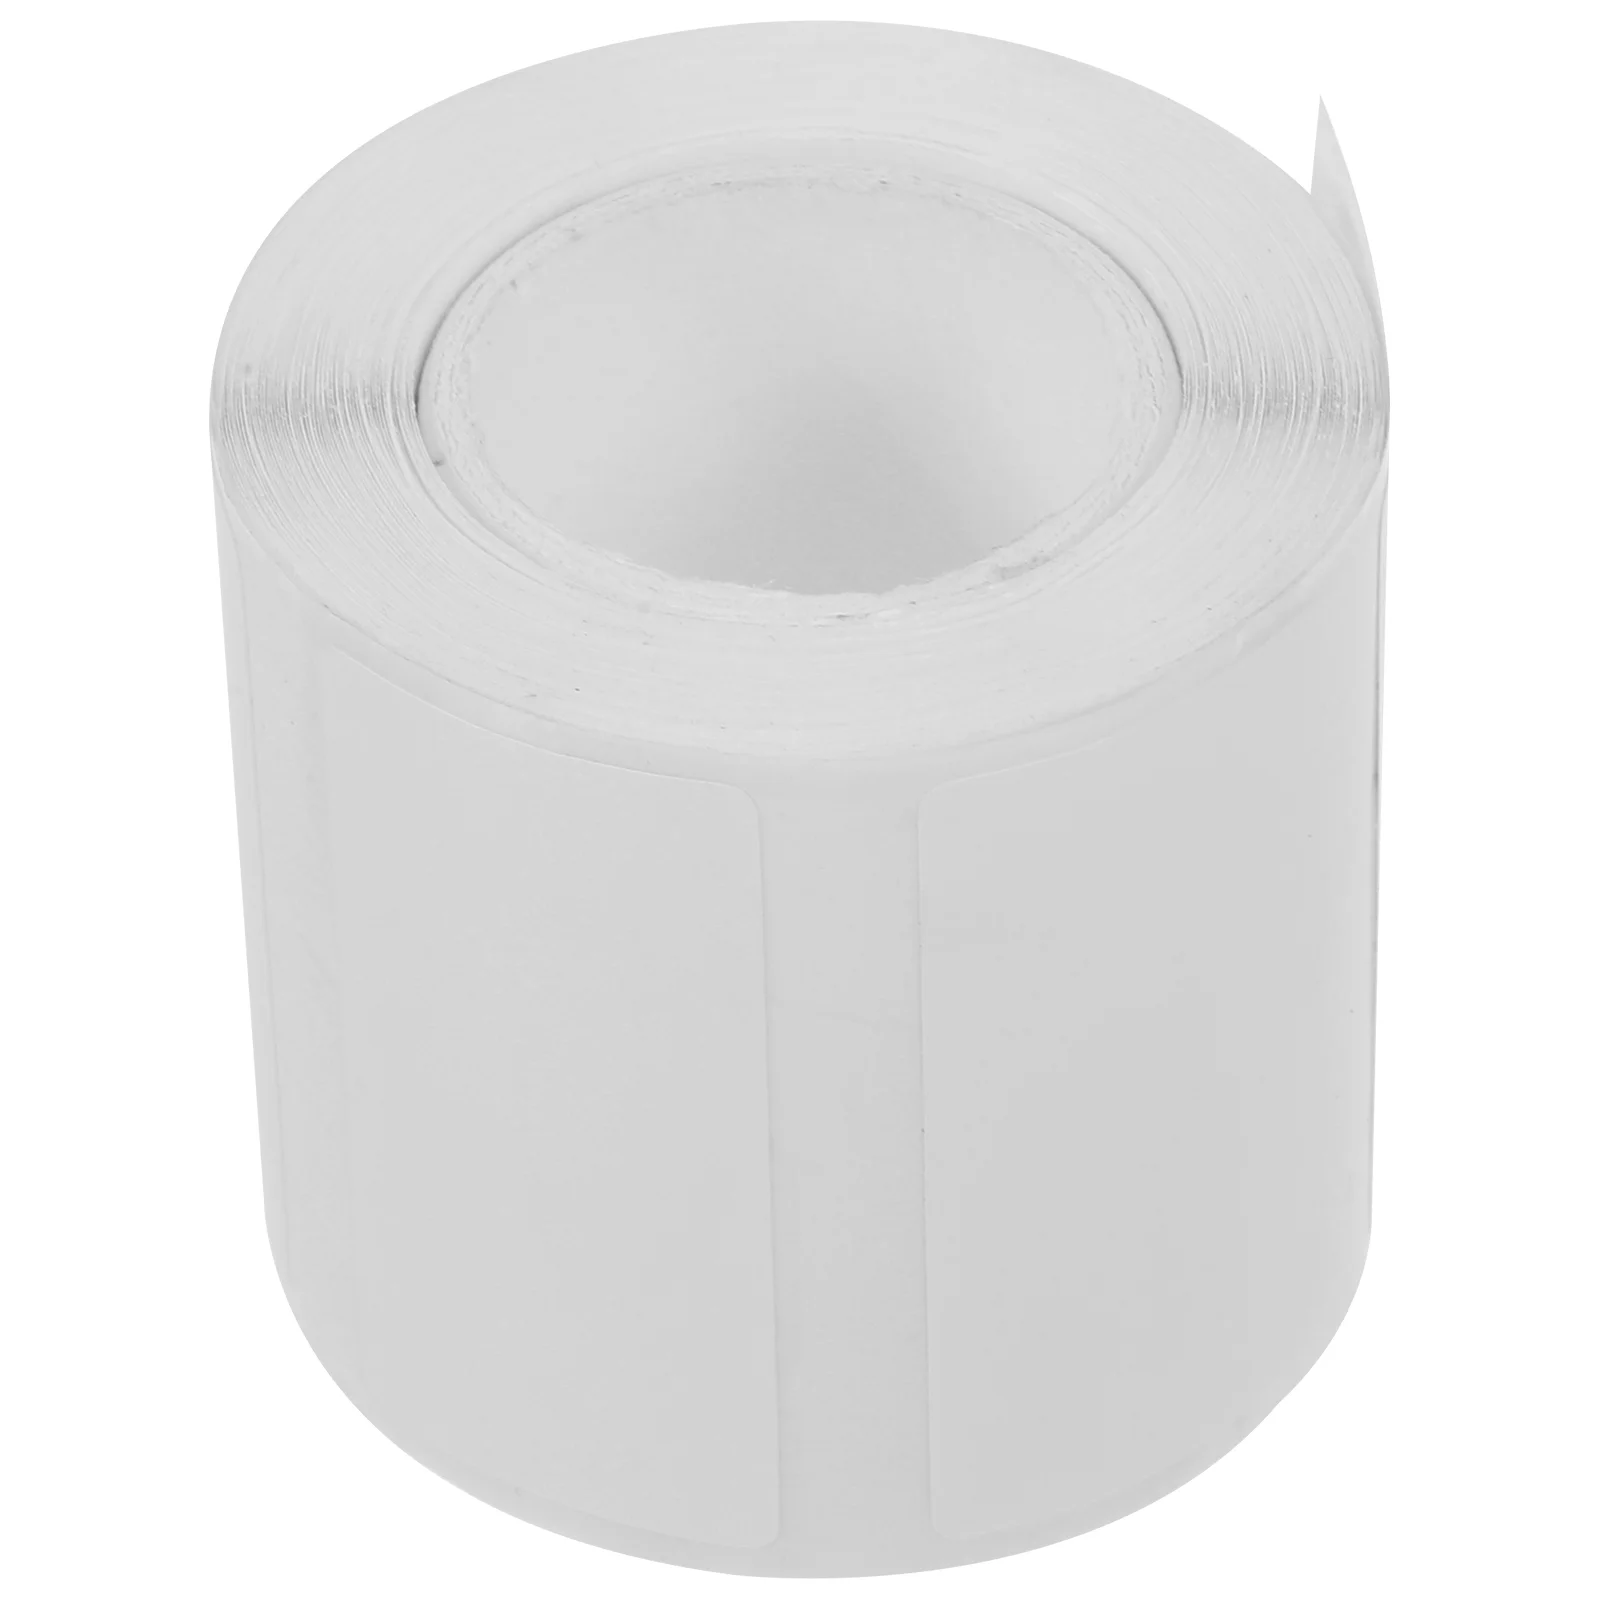 

1 Roll of Blank Classified Tags Self-adhesive Bottle Labels Compact Bottle Stickers Bottle Supply